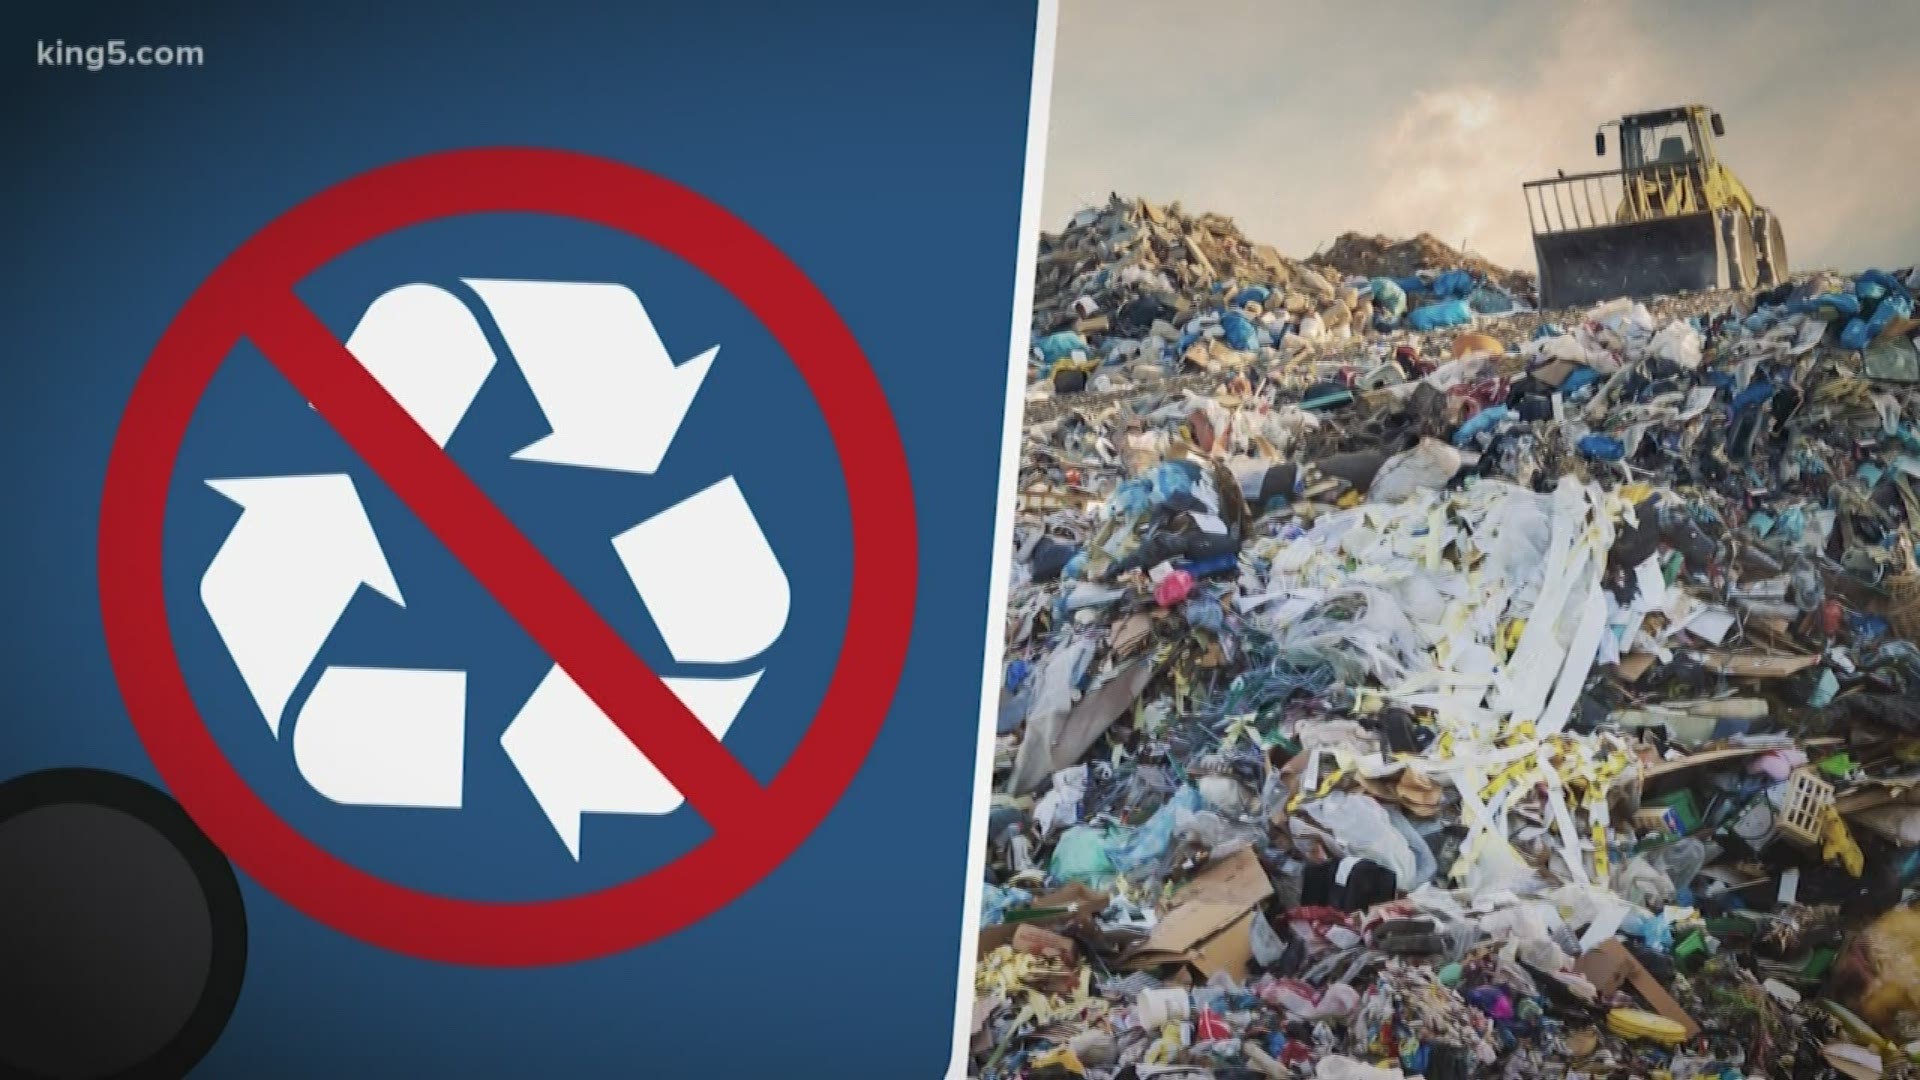 Many people know "reduce, reuse, recycle," but a lot of people struggle with that last one. Environmental reporter shows what can and cannot go into your recyclables